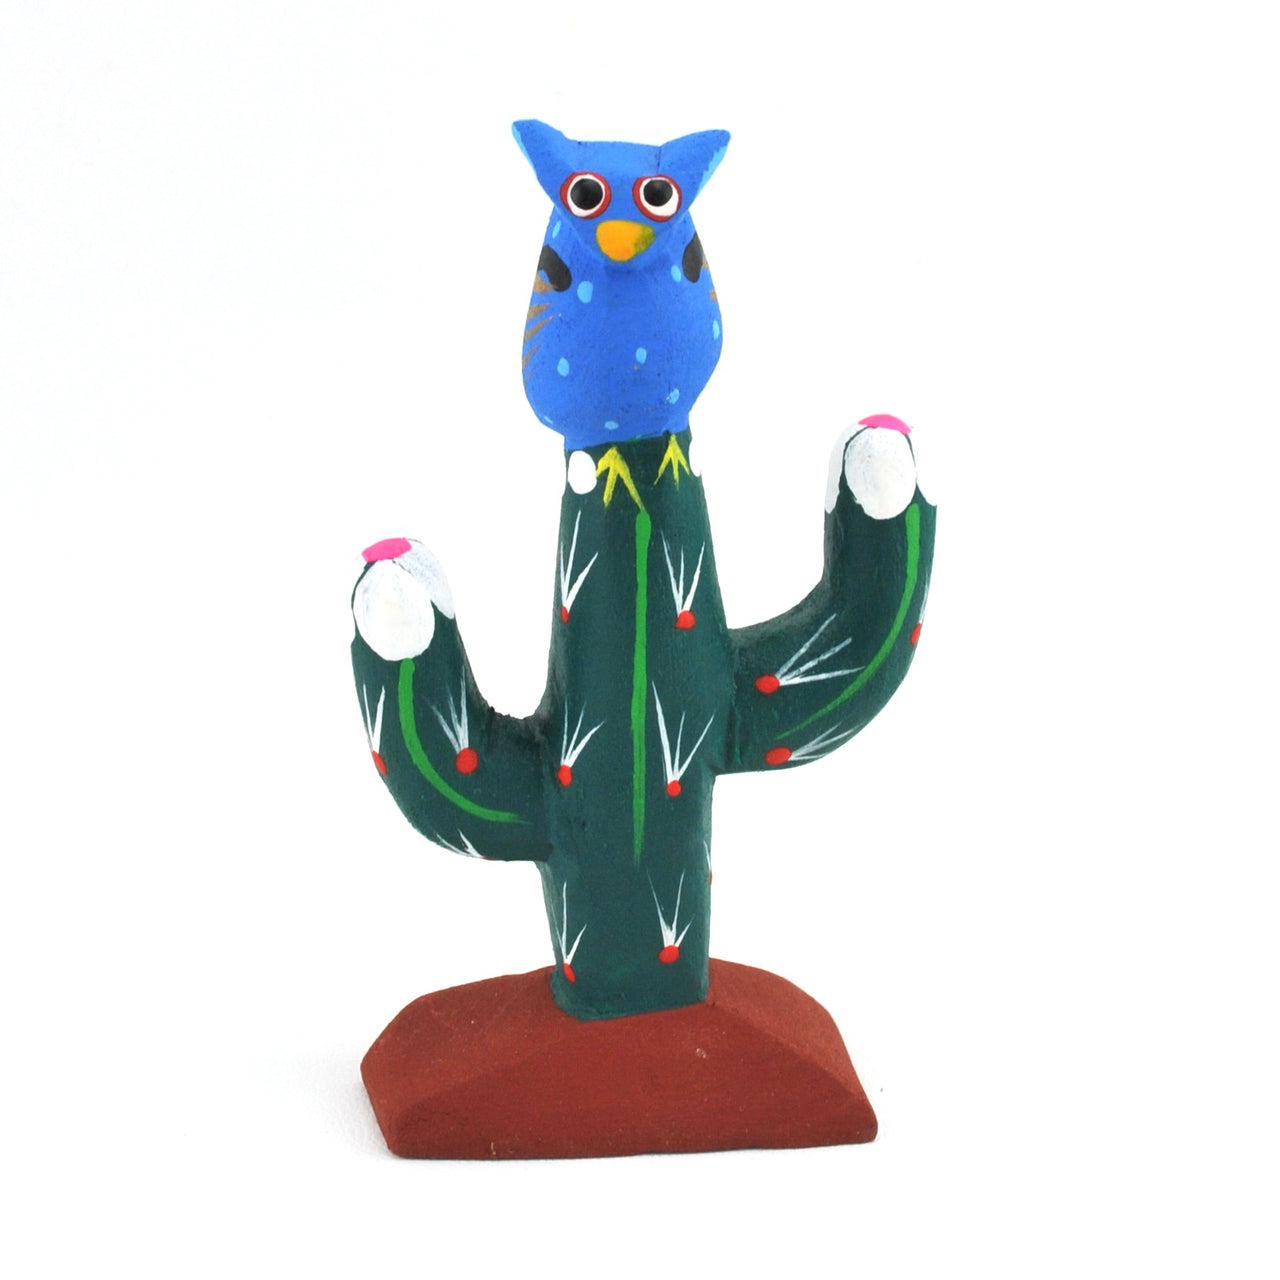 Oaxacan Saguaro Cactus with Owl by Mendez